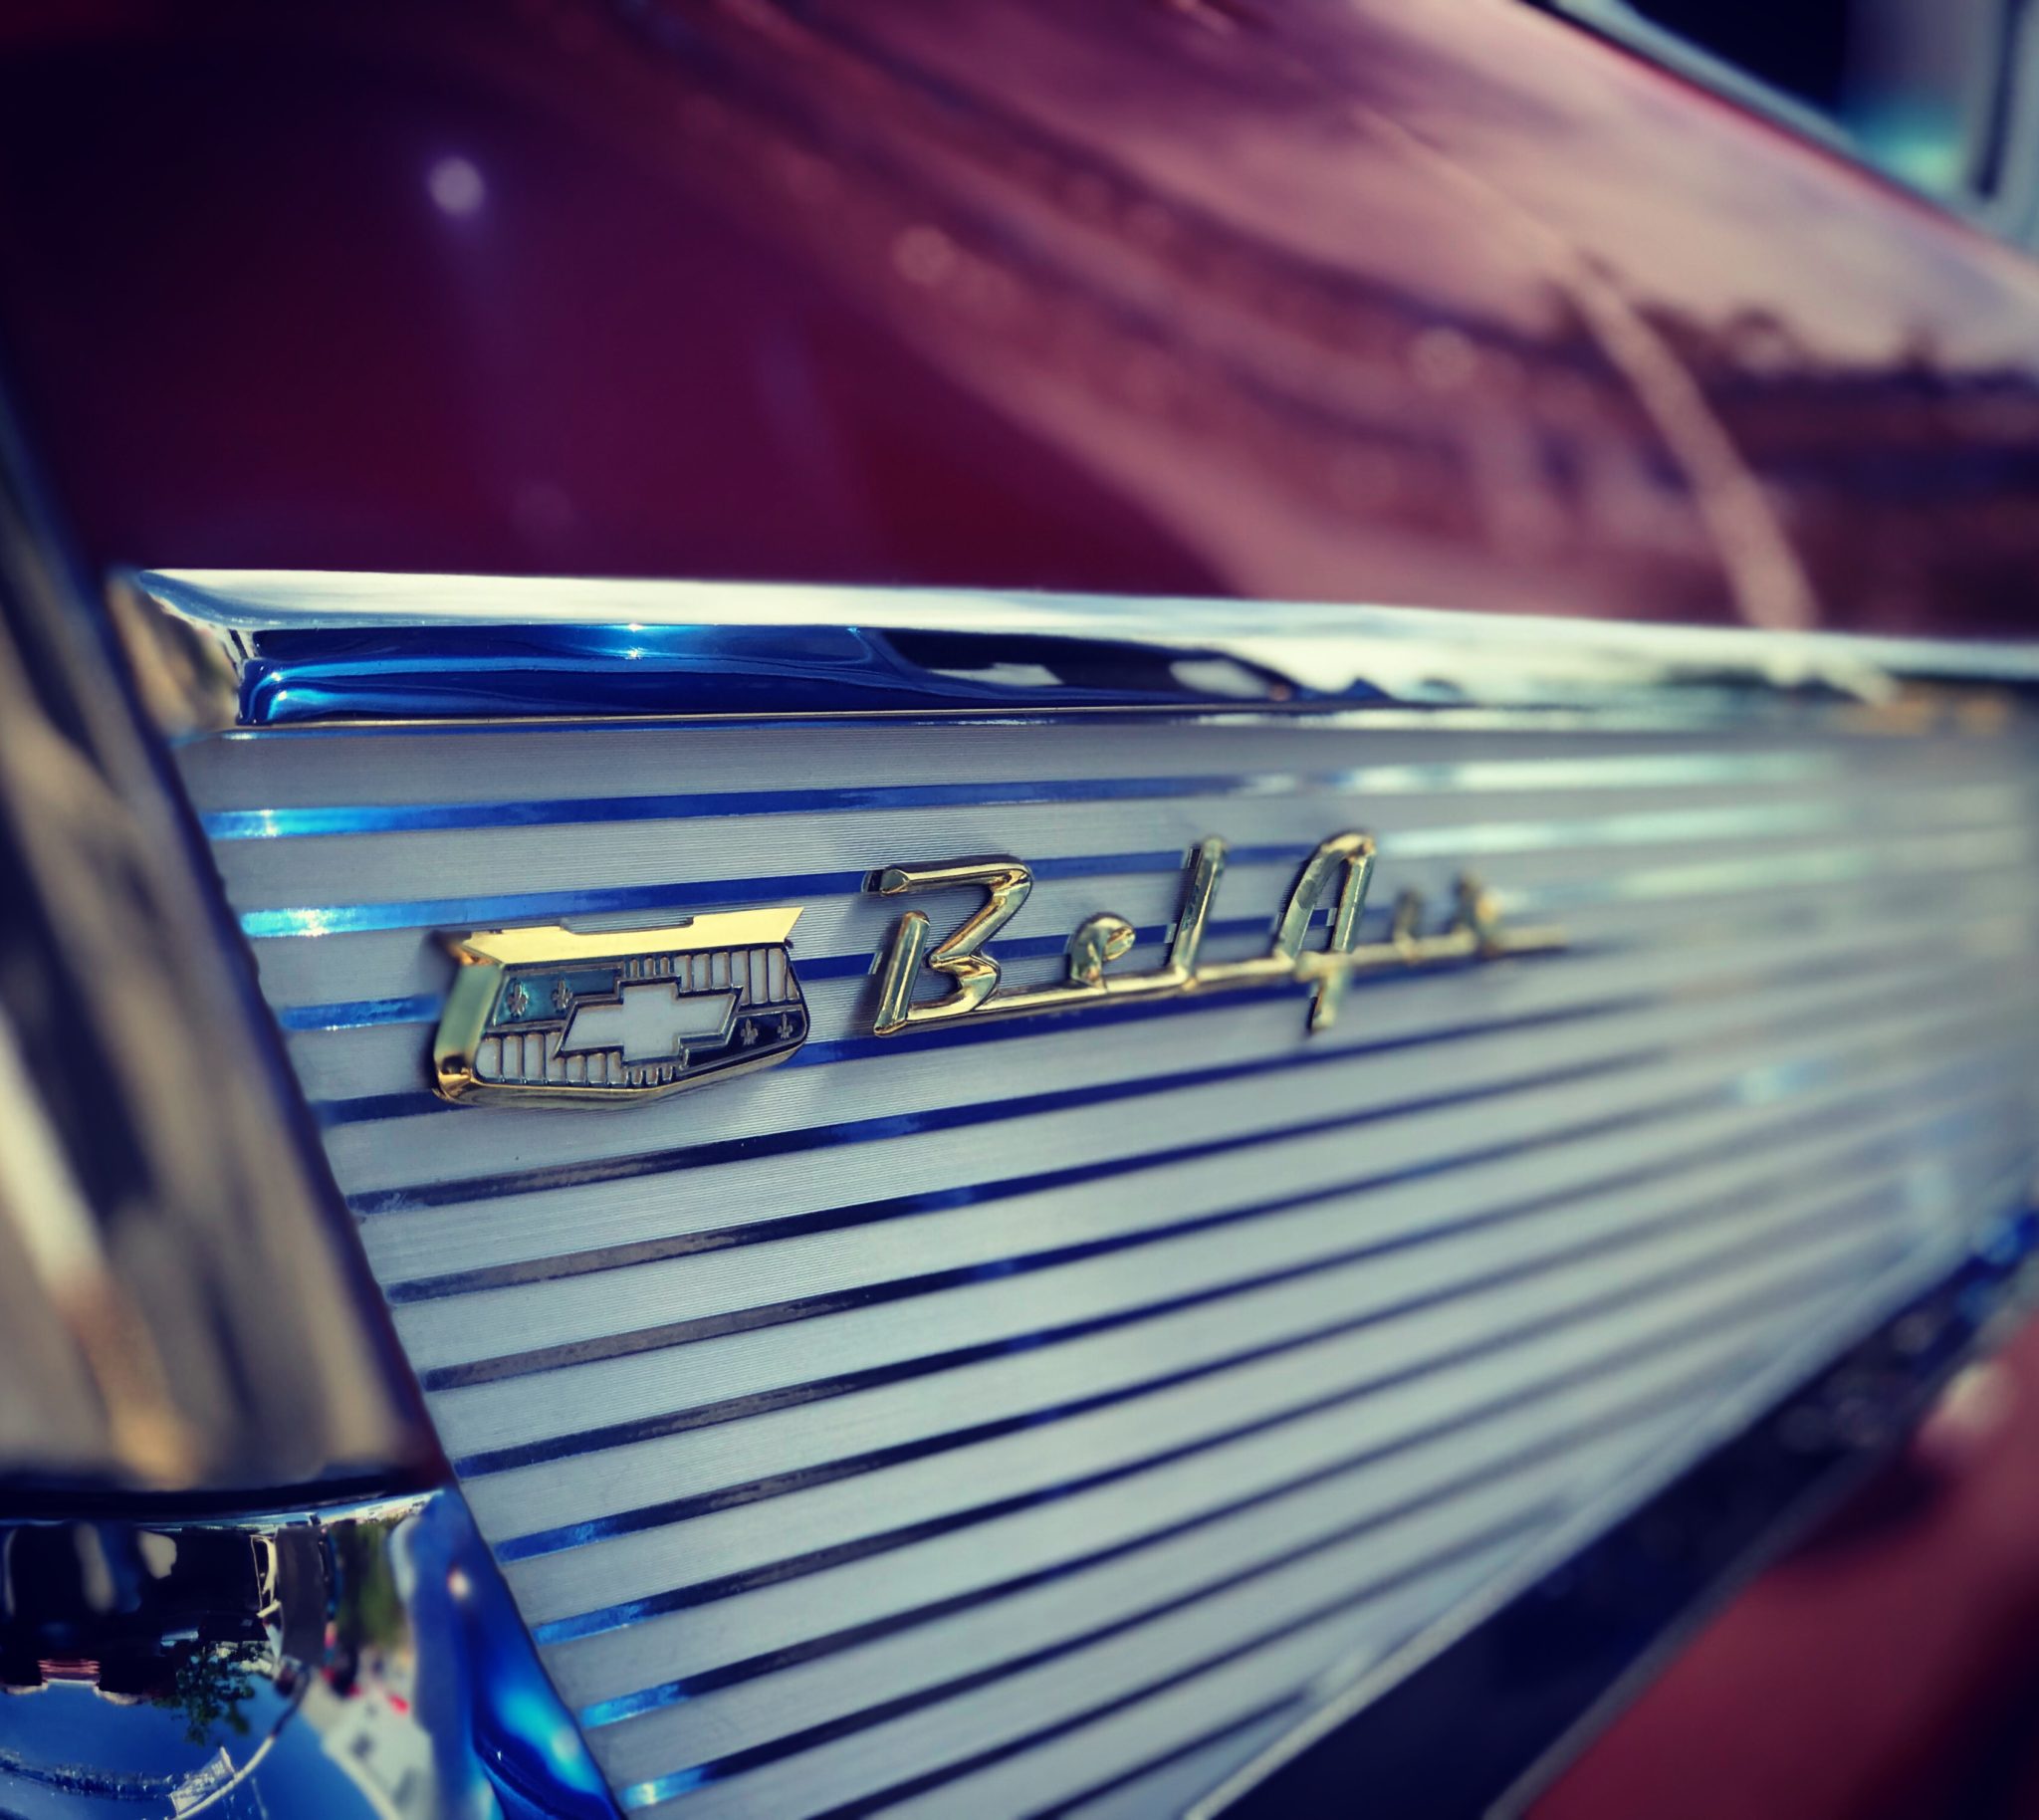 Photo of the logo on a 1957 Chevrolet Bel Air